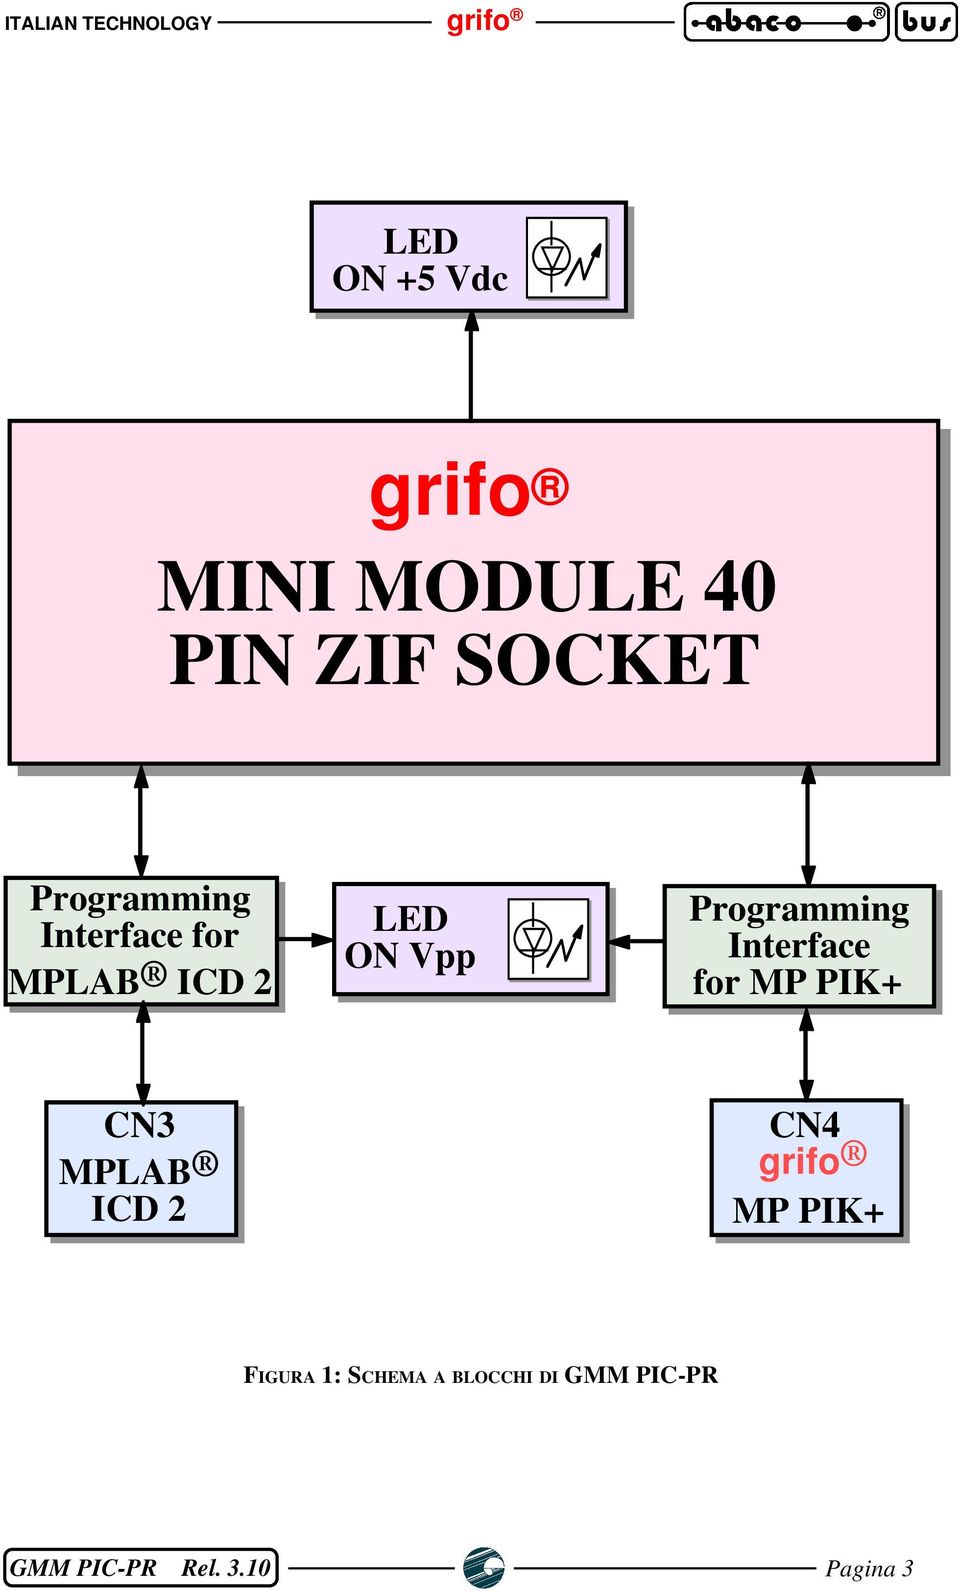 Programming Interface for MP PIK+ CN3 MPLAB ICD 2 CN4 grifo MP